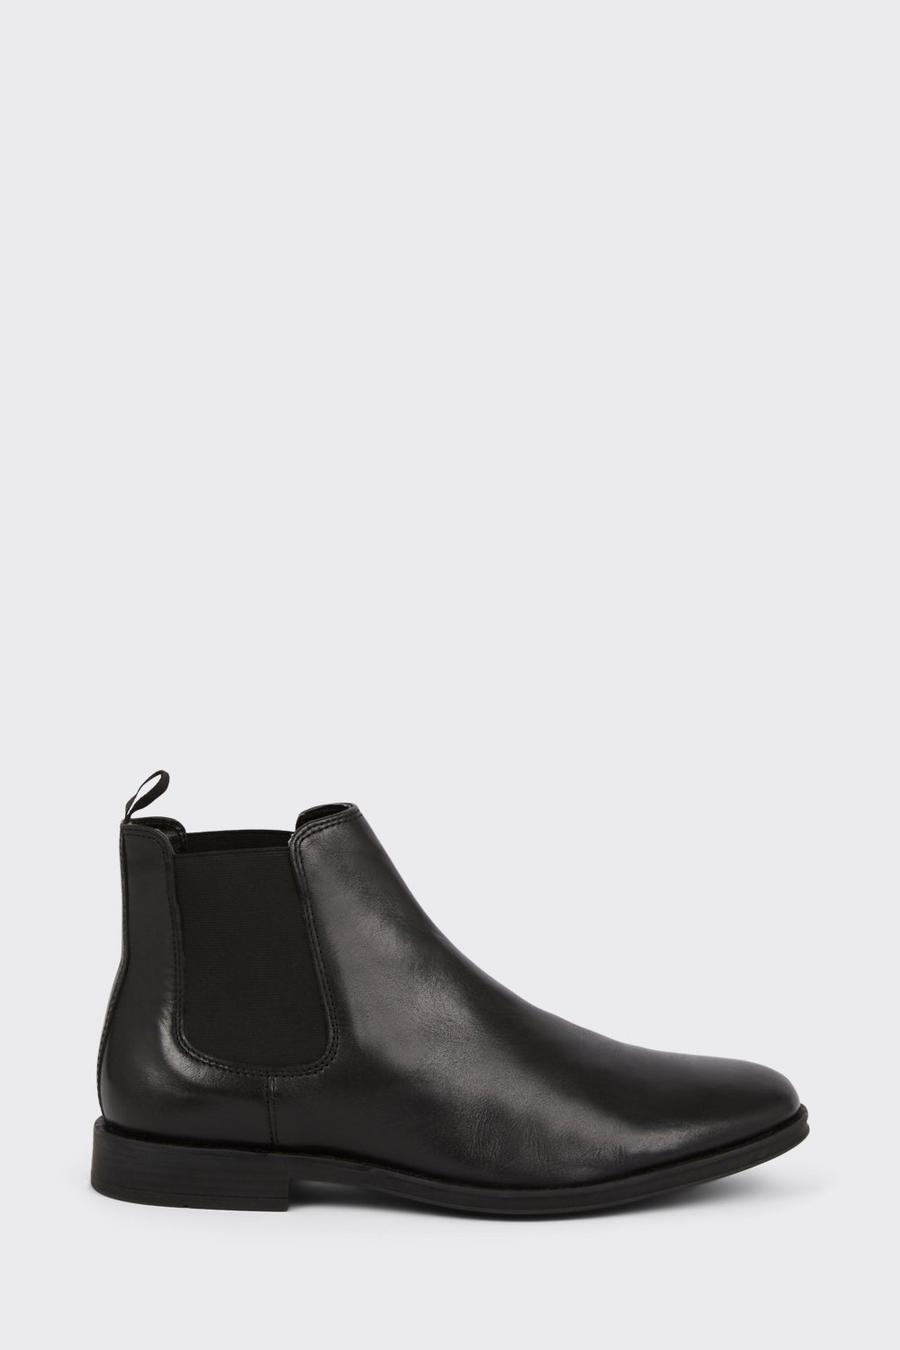 Leather Smart Black Chelsea Boots